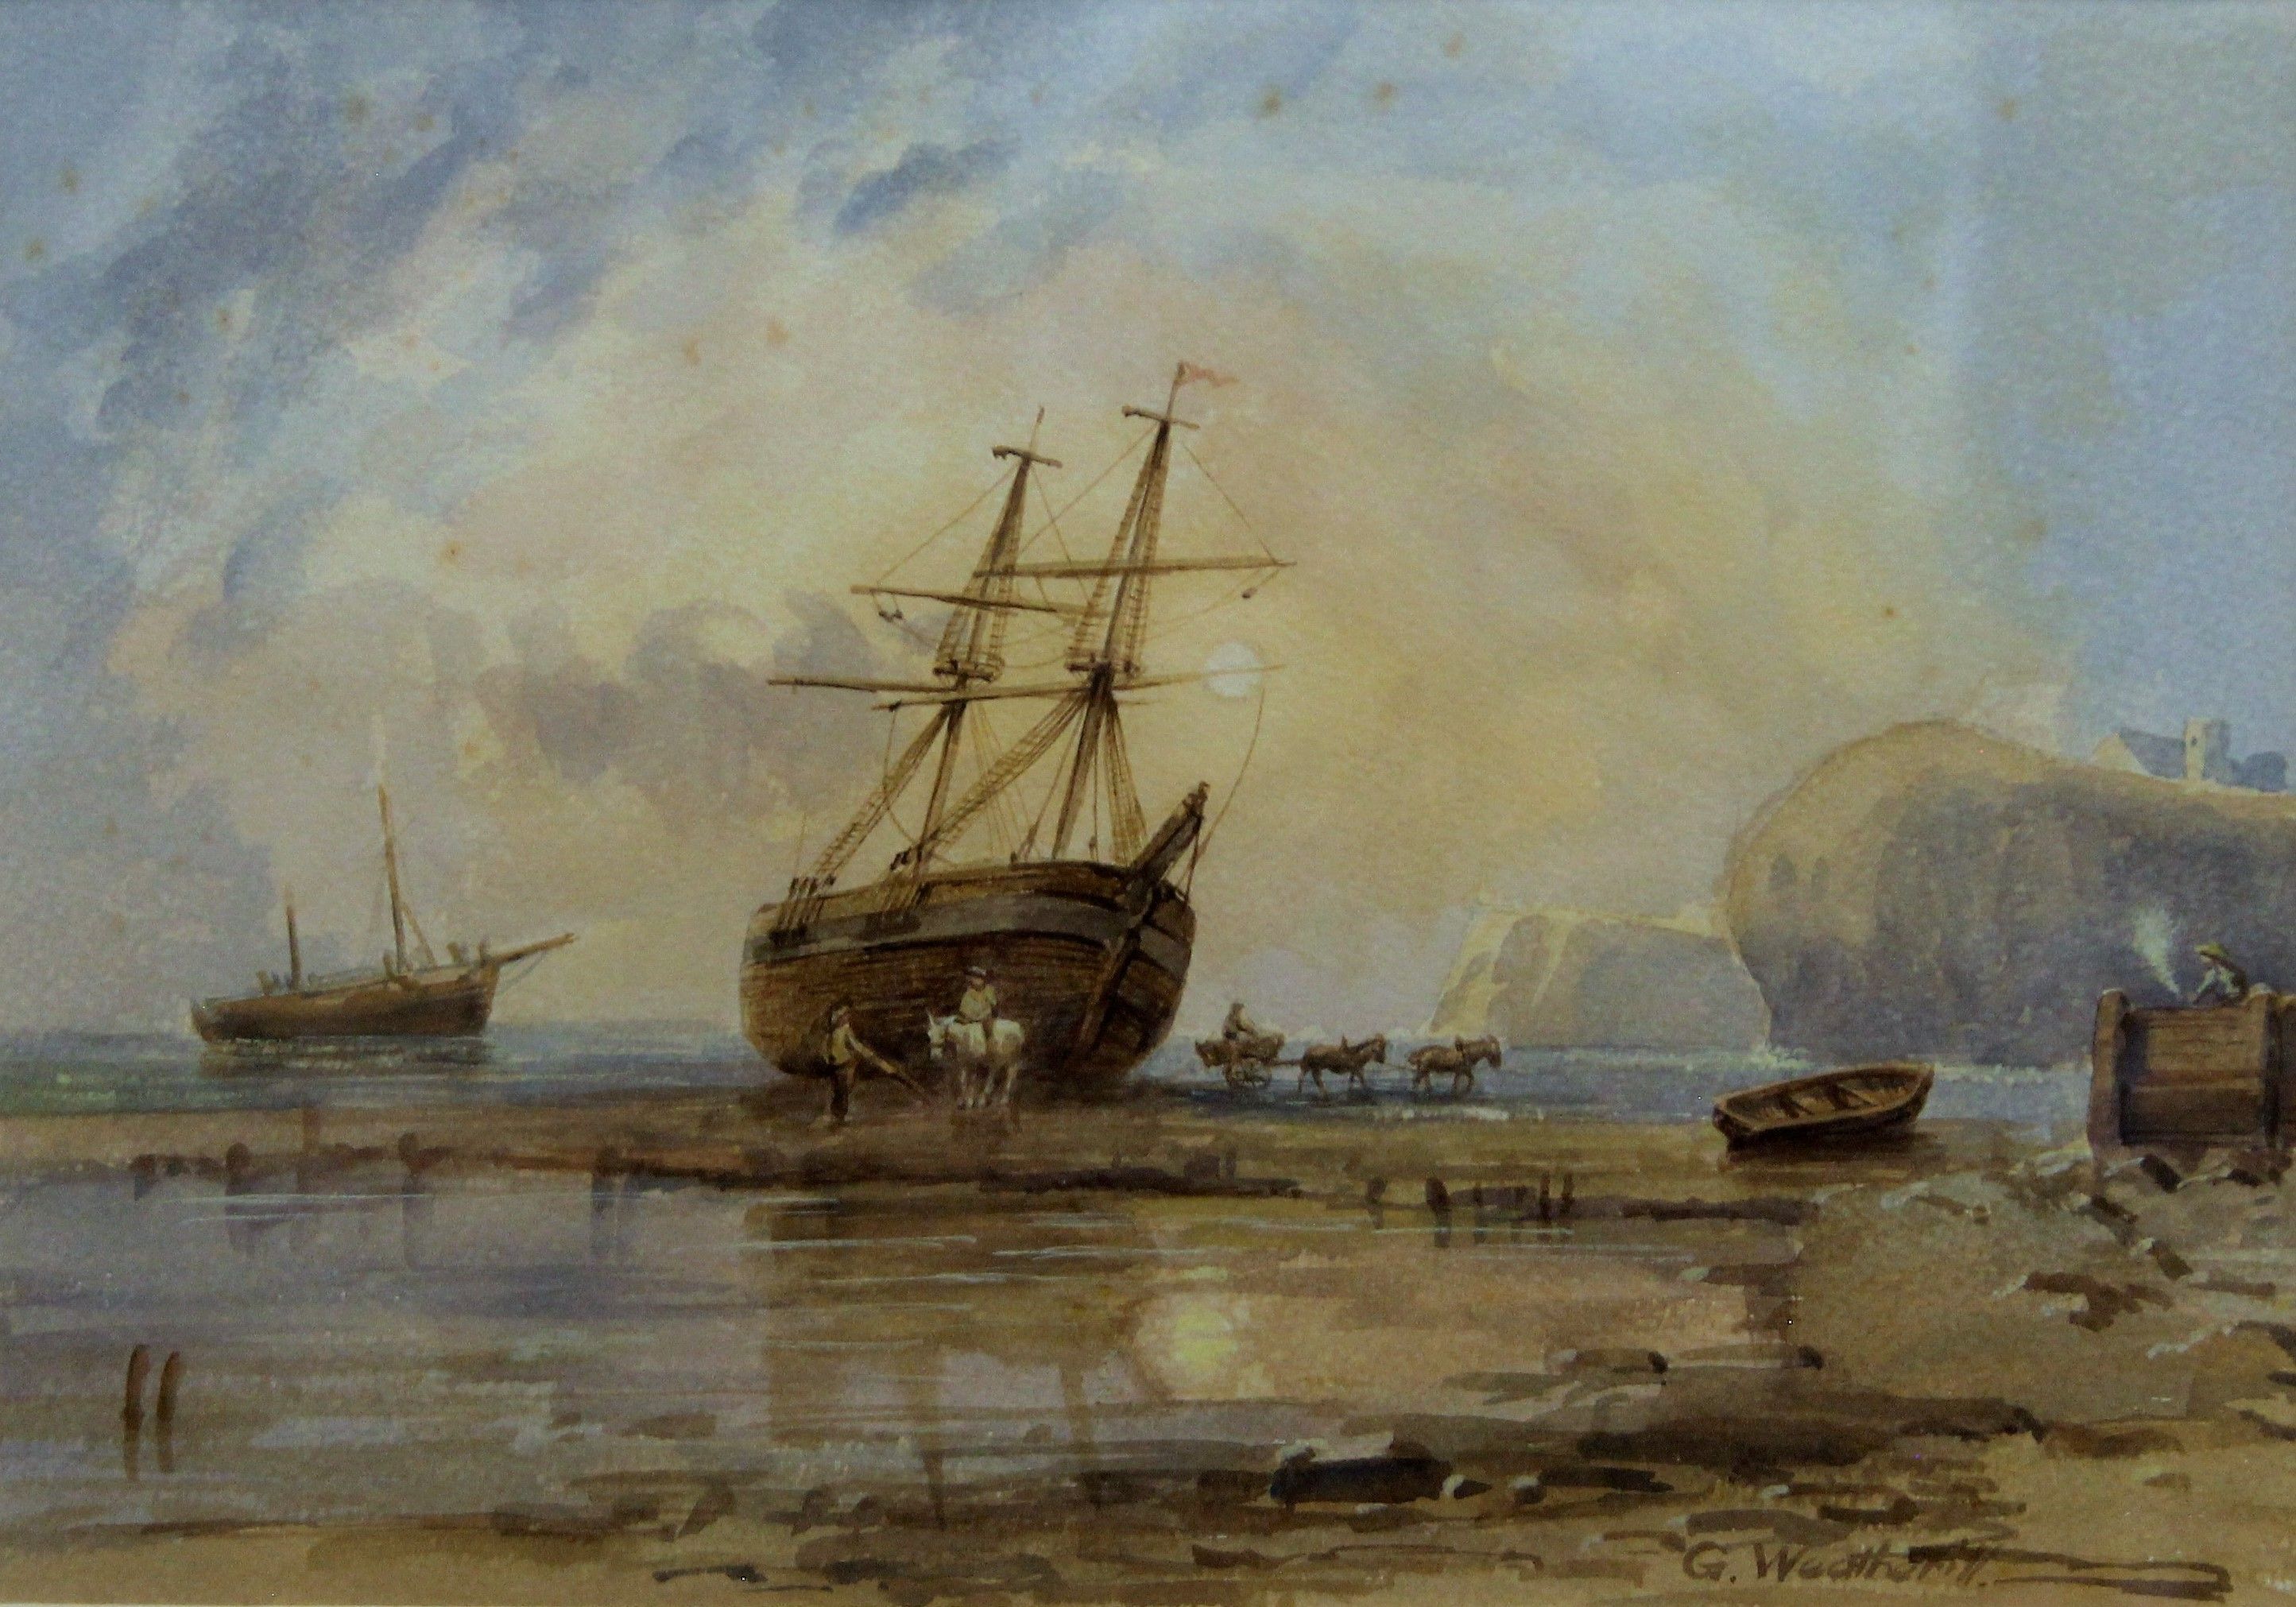 G WEATHERILL, Boats at Whitby, watercolour, signed, framed and glazed. 34 x 24 cm.